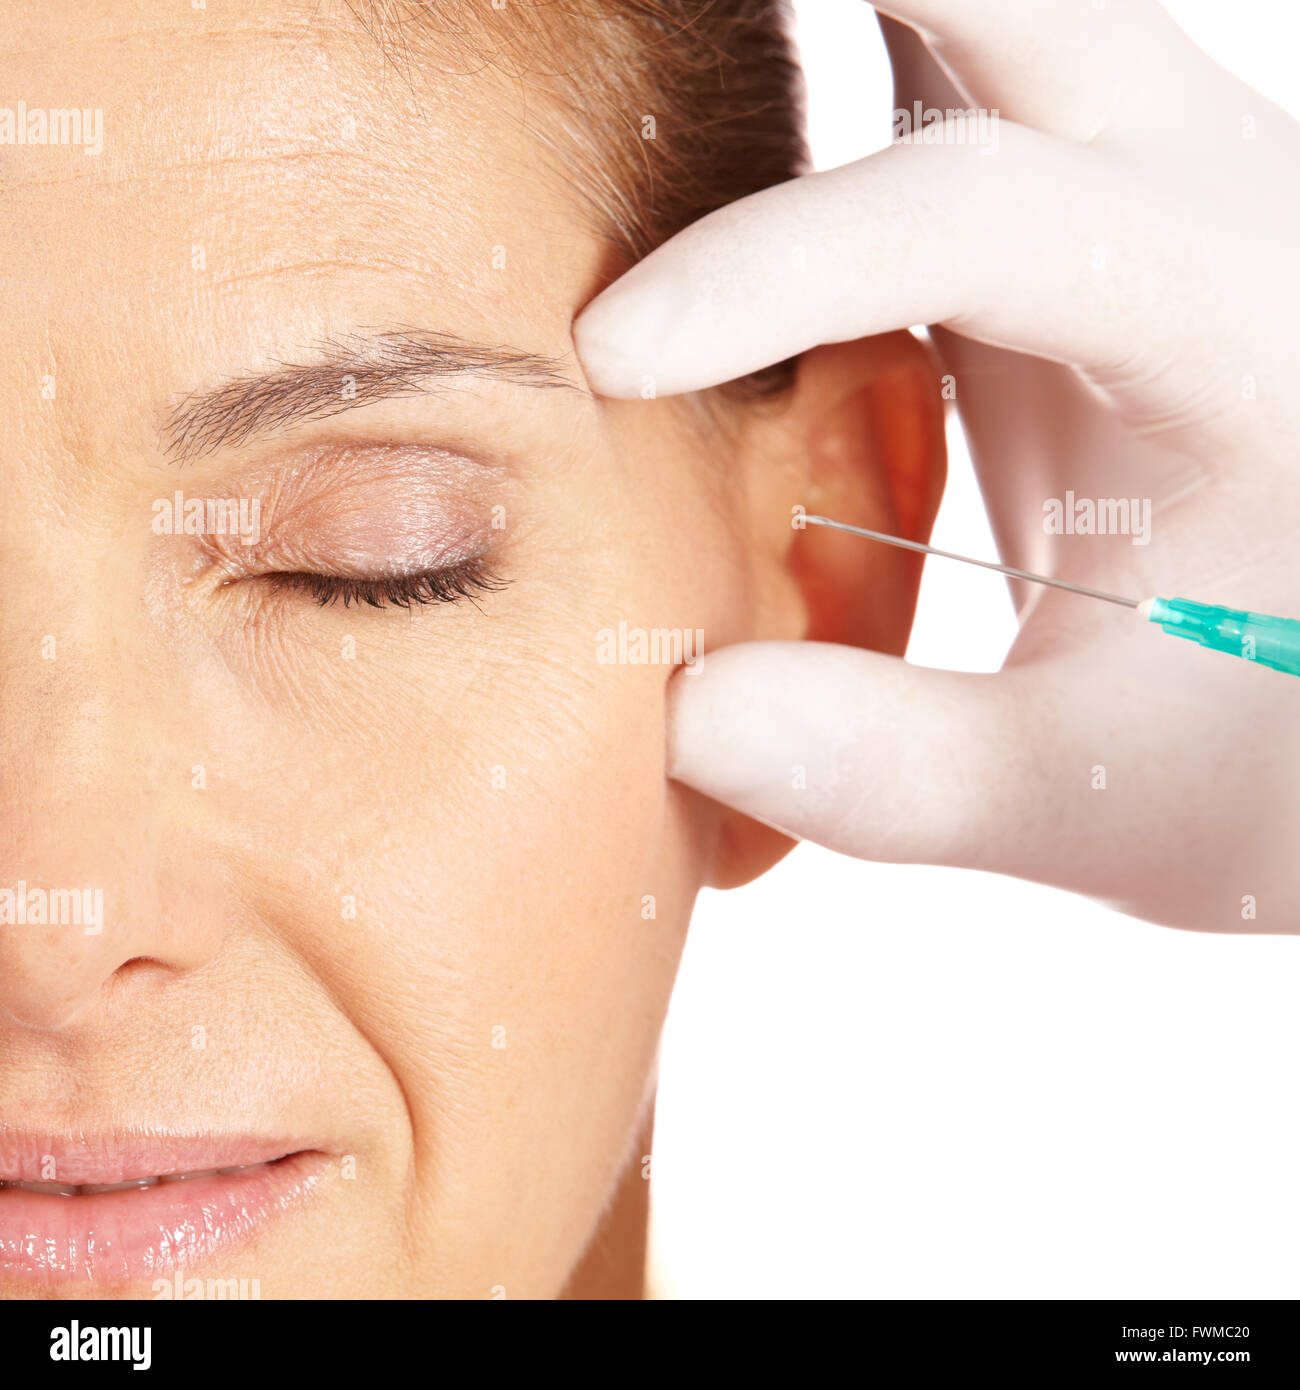 Elderly woman getting her eye wrinkles and crows feet removed Stock Photo